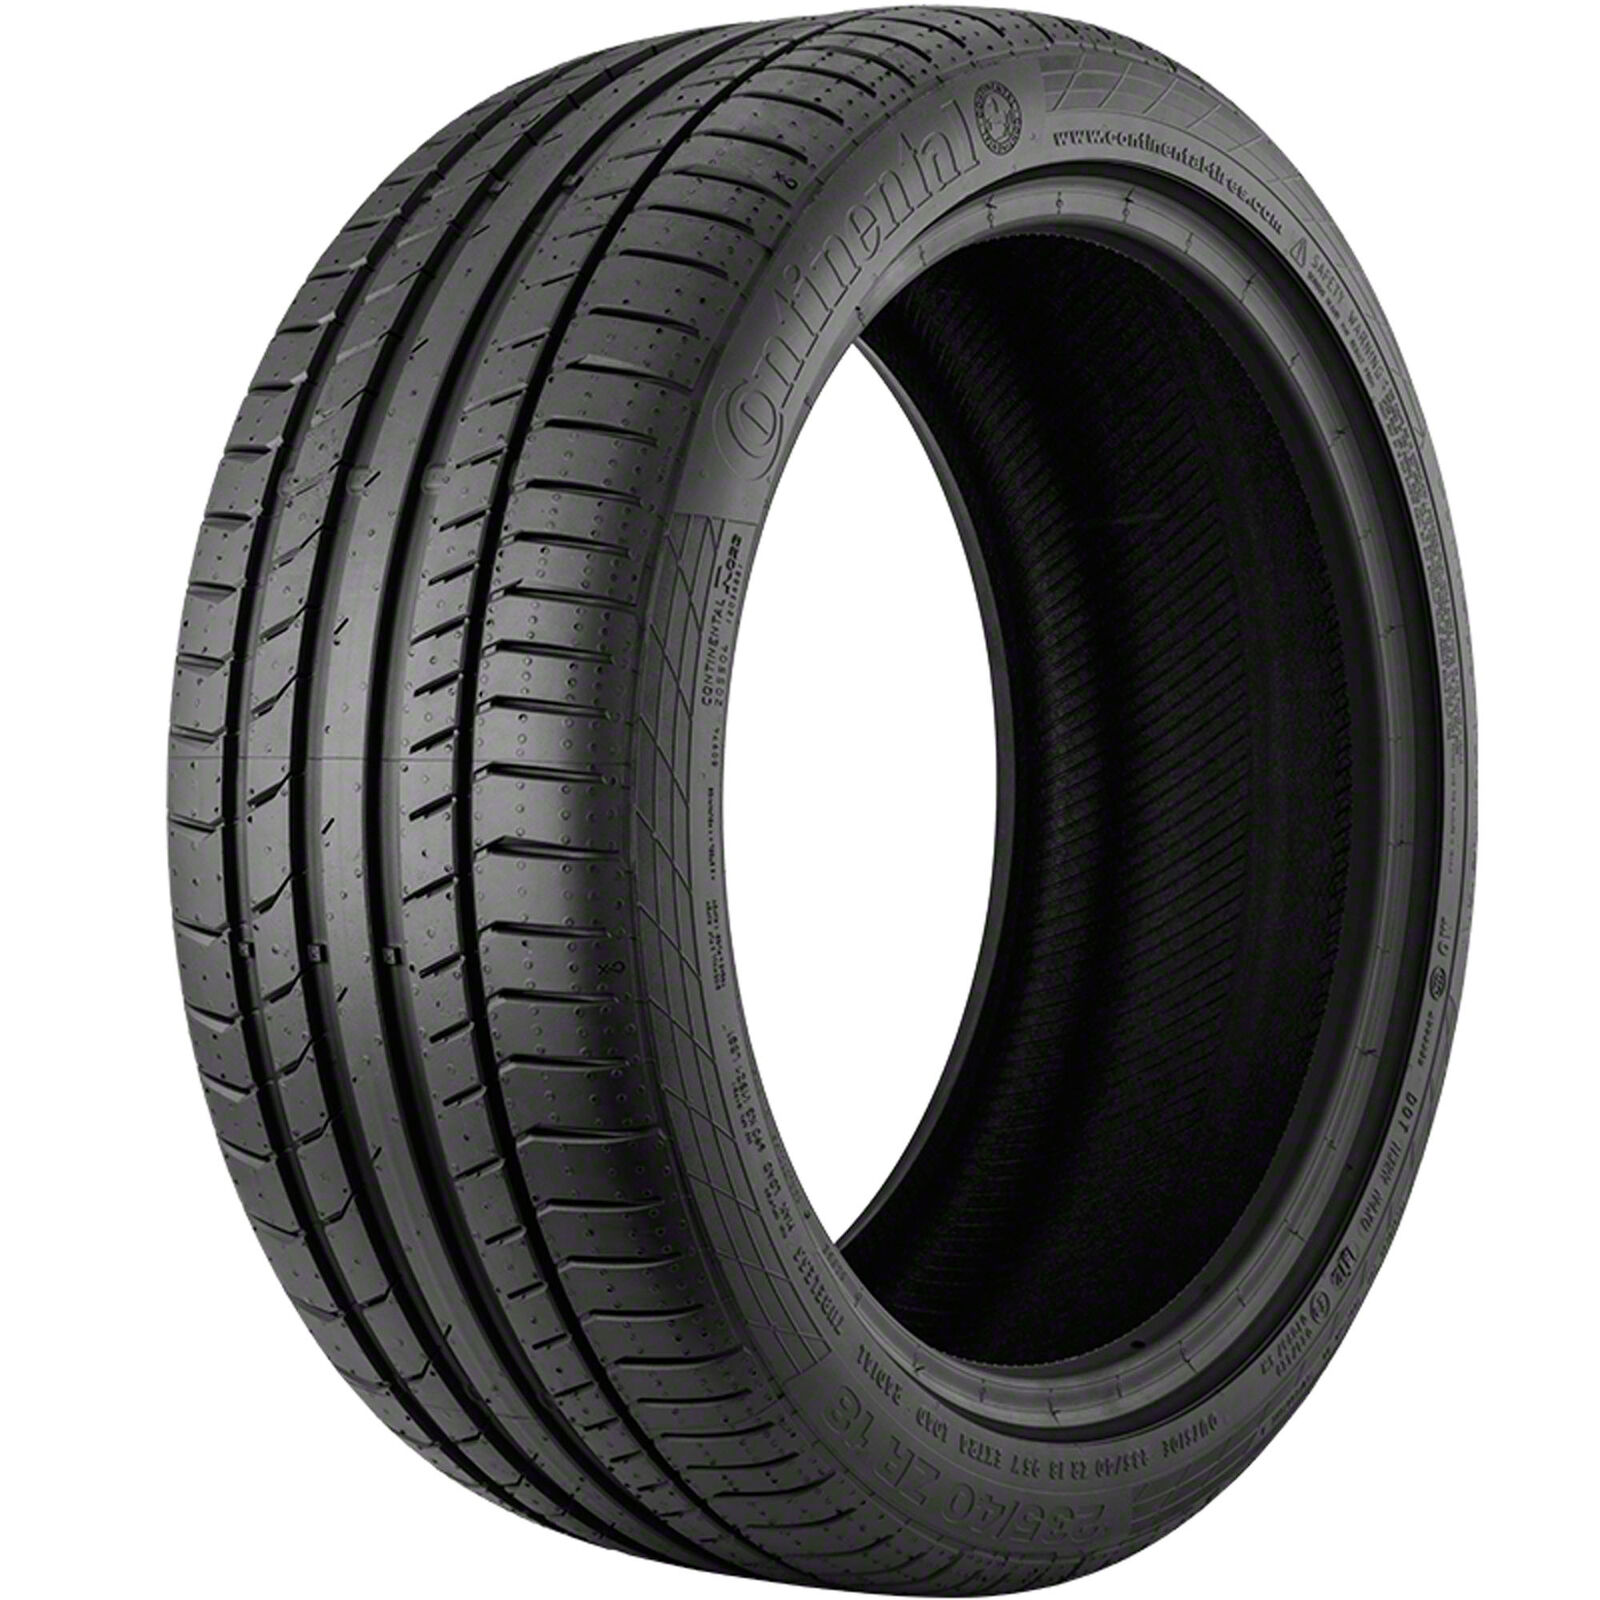 1 New Continental Contisportcontact 5p  - 285/40zr22 Tires 2854022 285 40 22